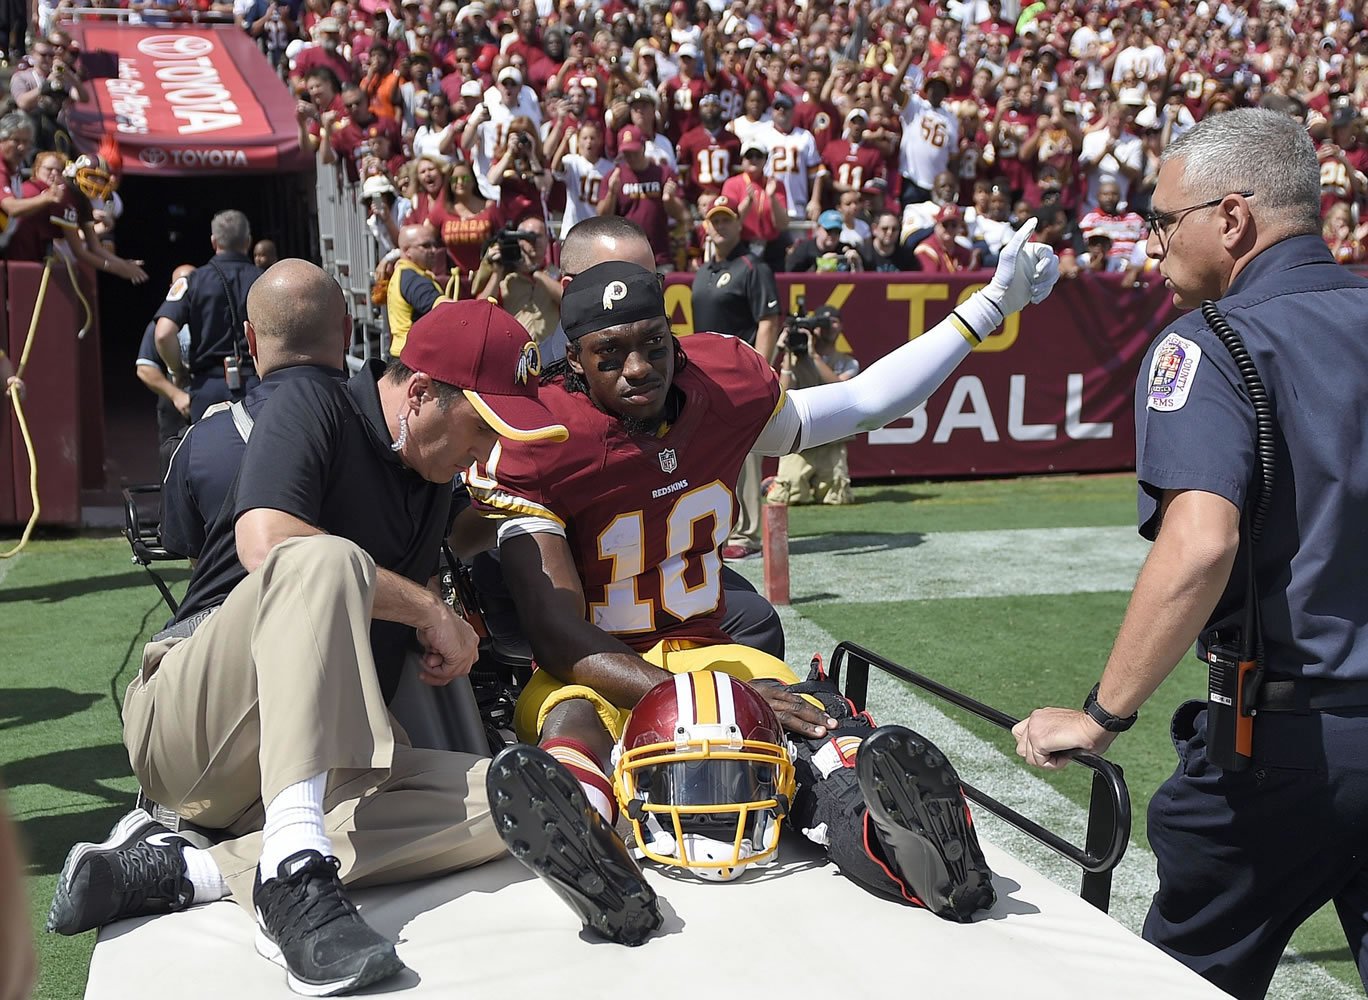 Washington Redskins quarterback Robert Griffin III (10) leaves the game on a cart after injuring his left ankle during the first half against the Jacksonville Jaguars on Sunday, Sept. 14, 2014, in Landover, Md.